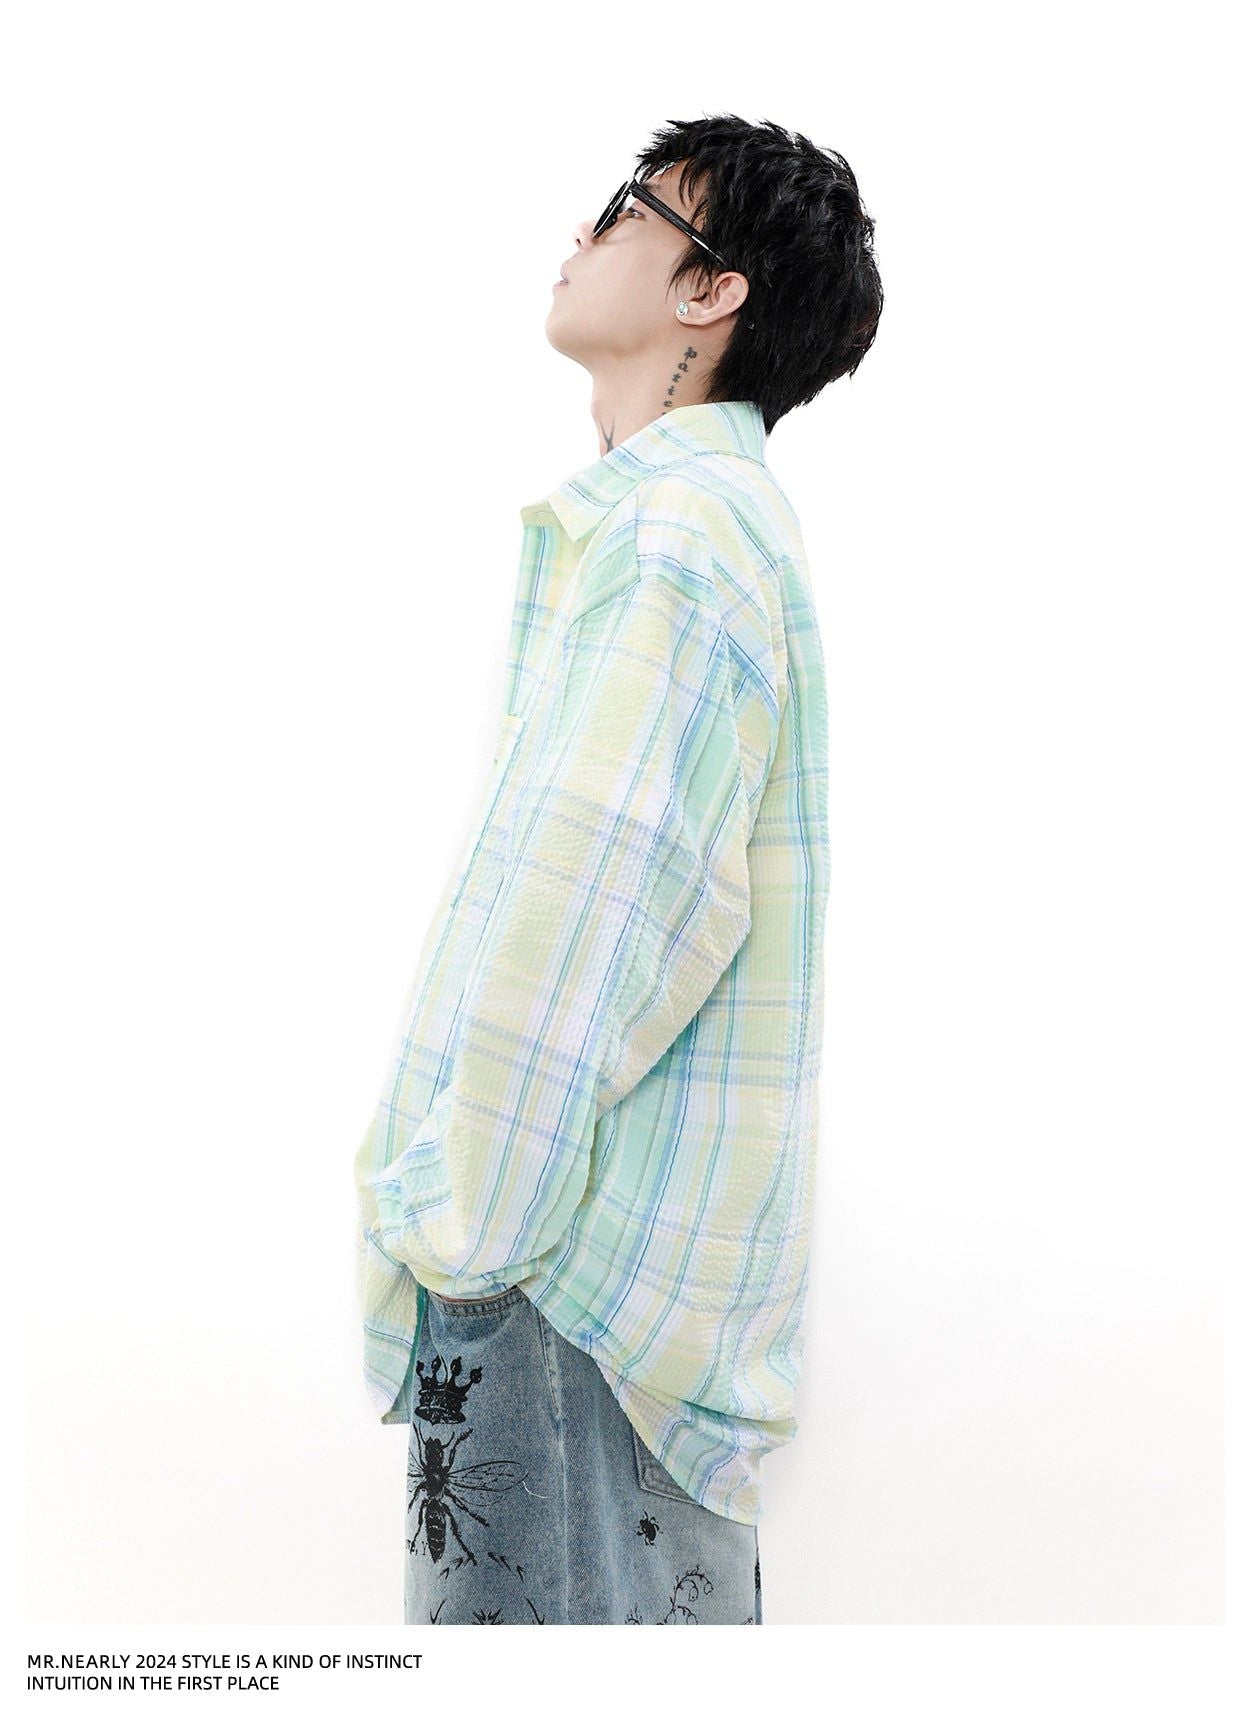 Bubble Textured Plaid Shirt Korean Street Fashion Shirt By Mr Nearly Shop Online at OH Vault